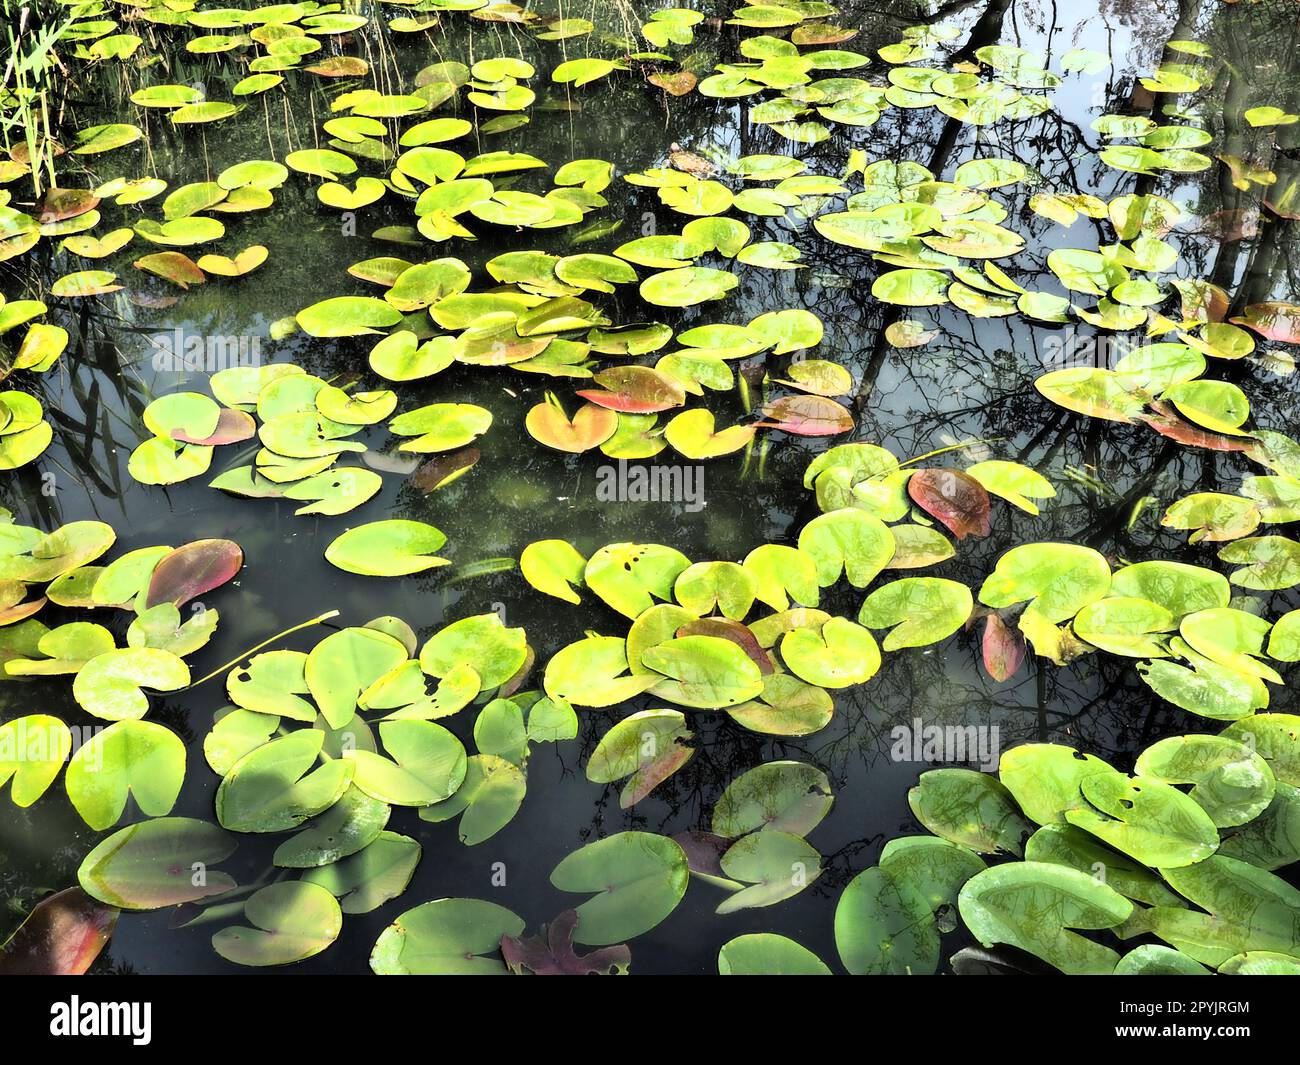 Water lily leaves, known as lily pads. Large cracked and yellow leaves of an aquatic plant on the surface of a pond or swamp. Water lily, or Nymphaean Nymphaeaceae - family of flowering plants Stock Photo